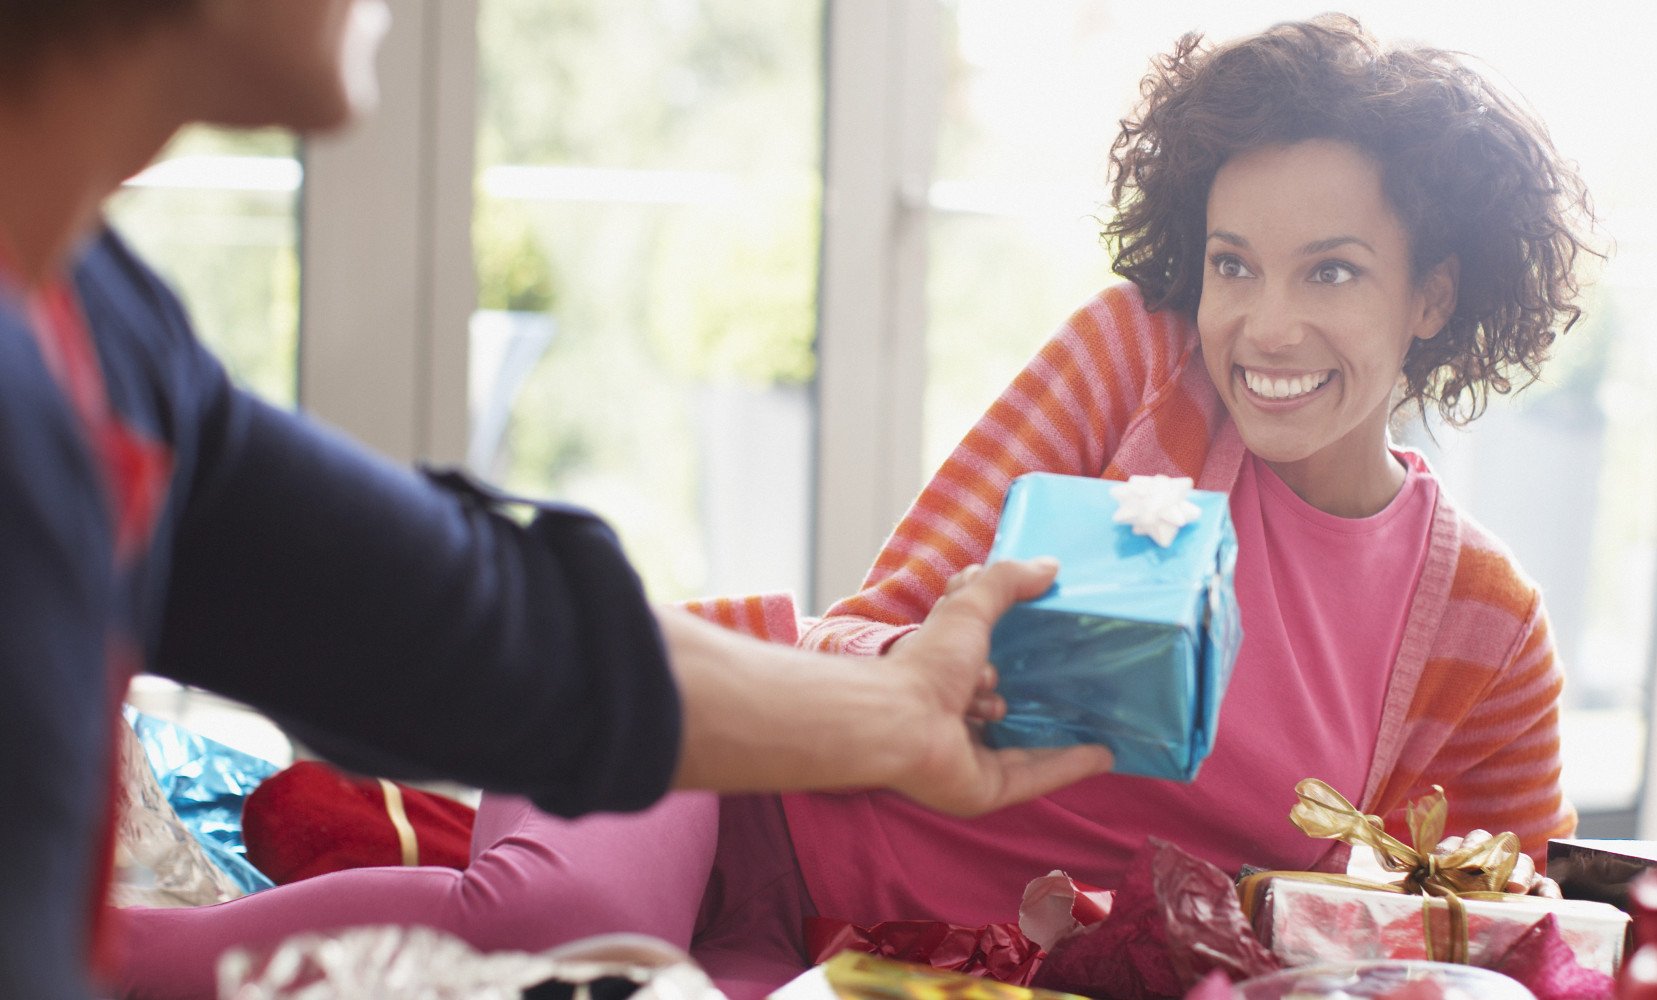 5 Christmas Gift Ideas for a Student Budget.